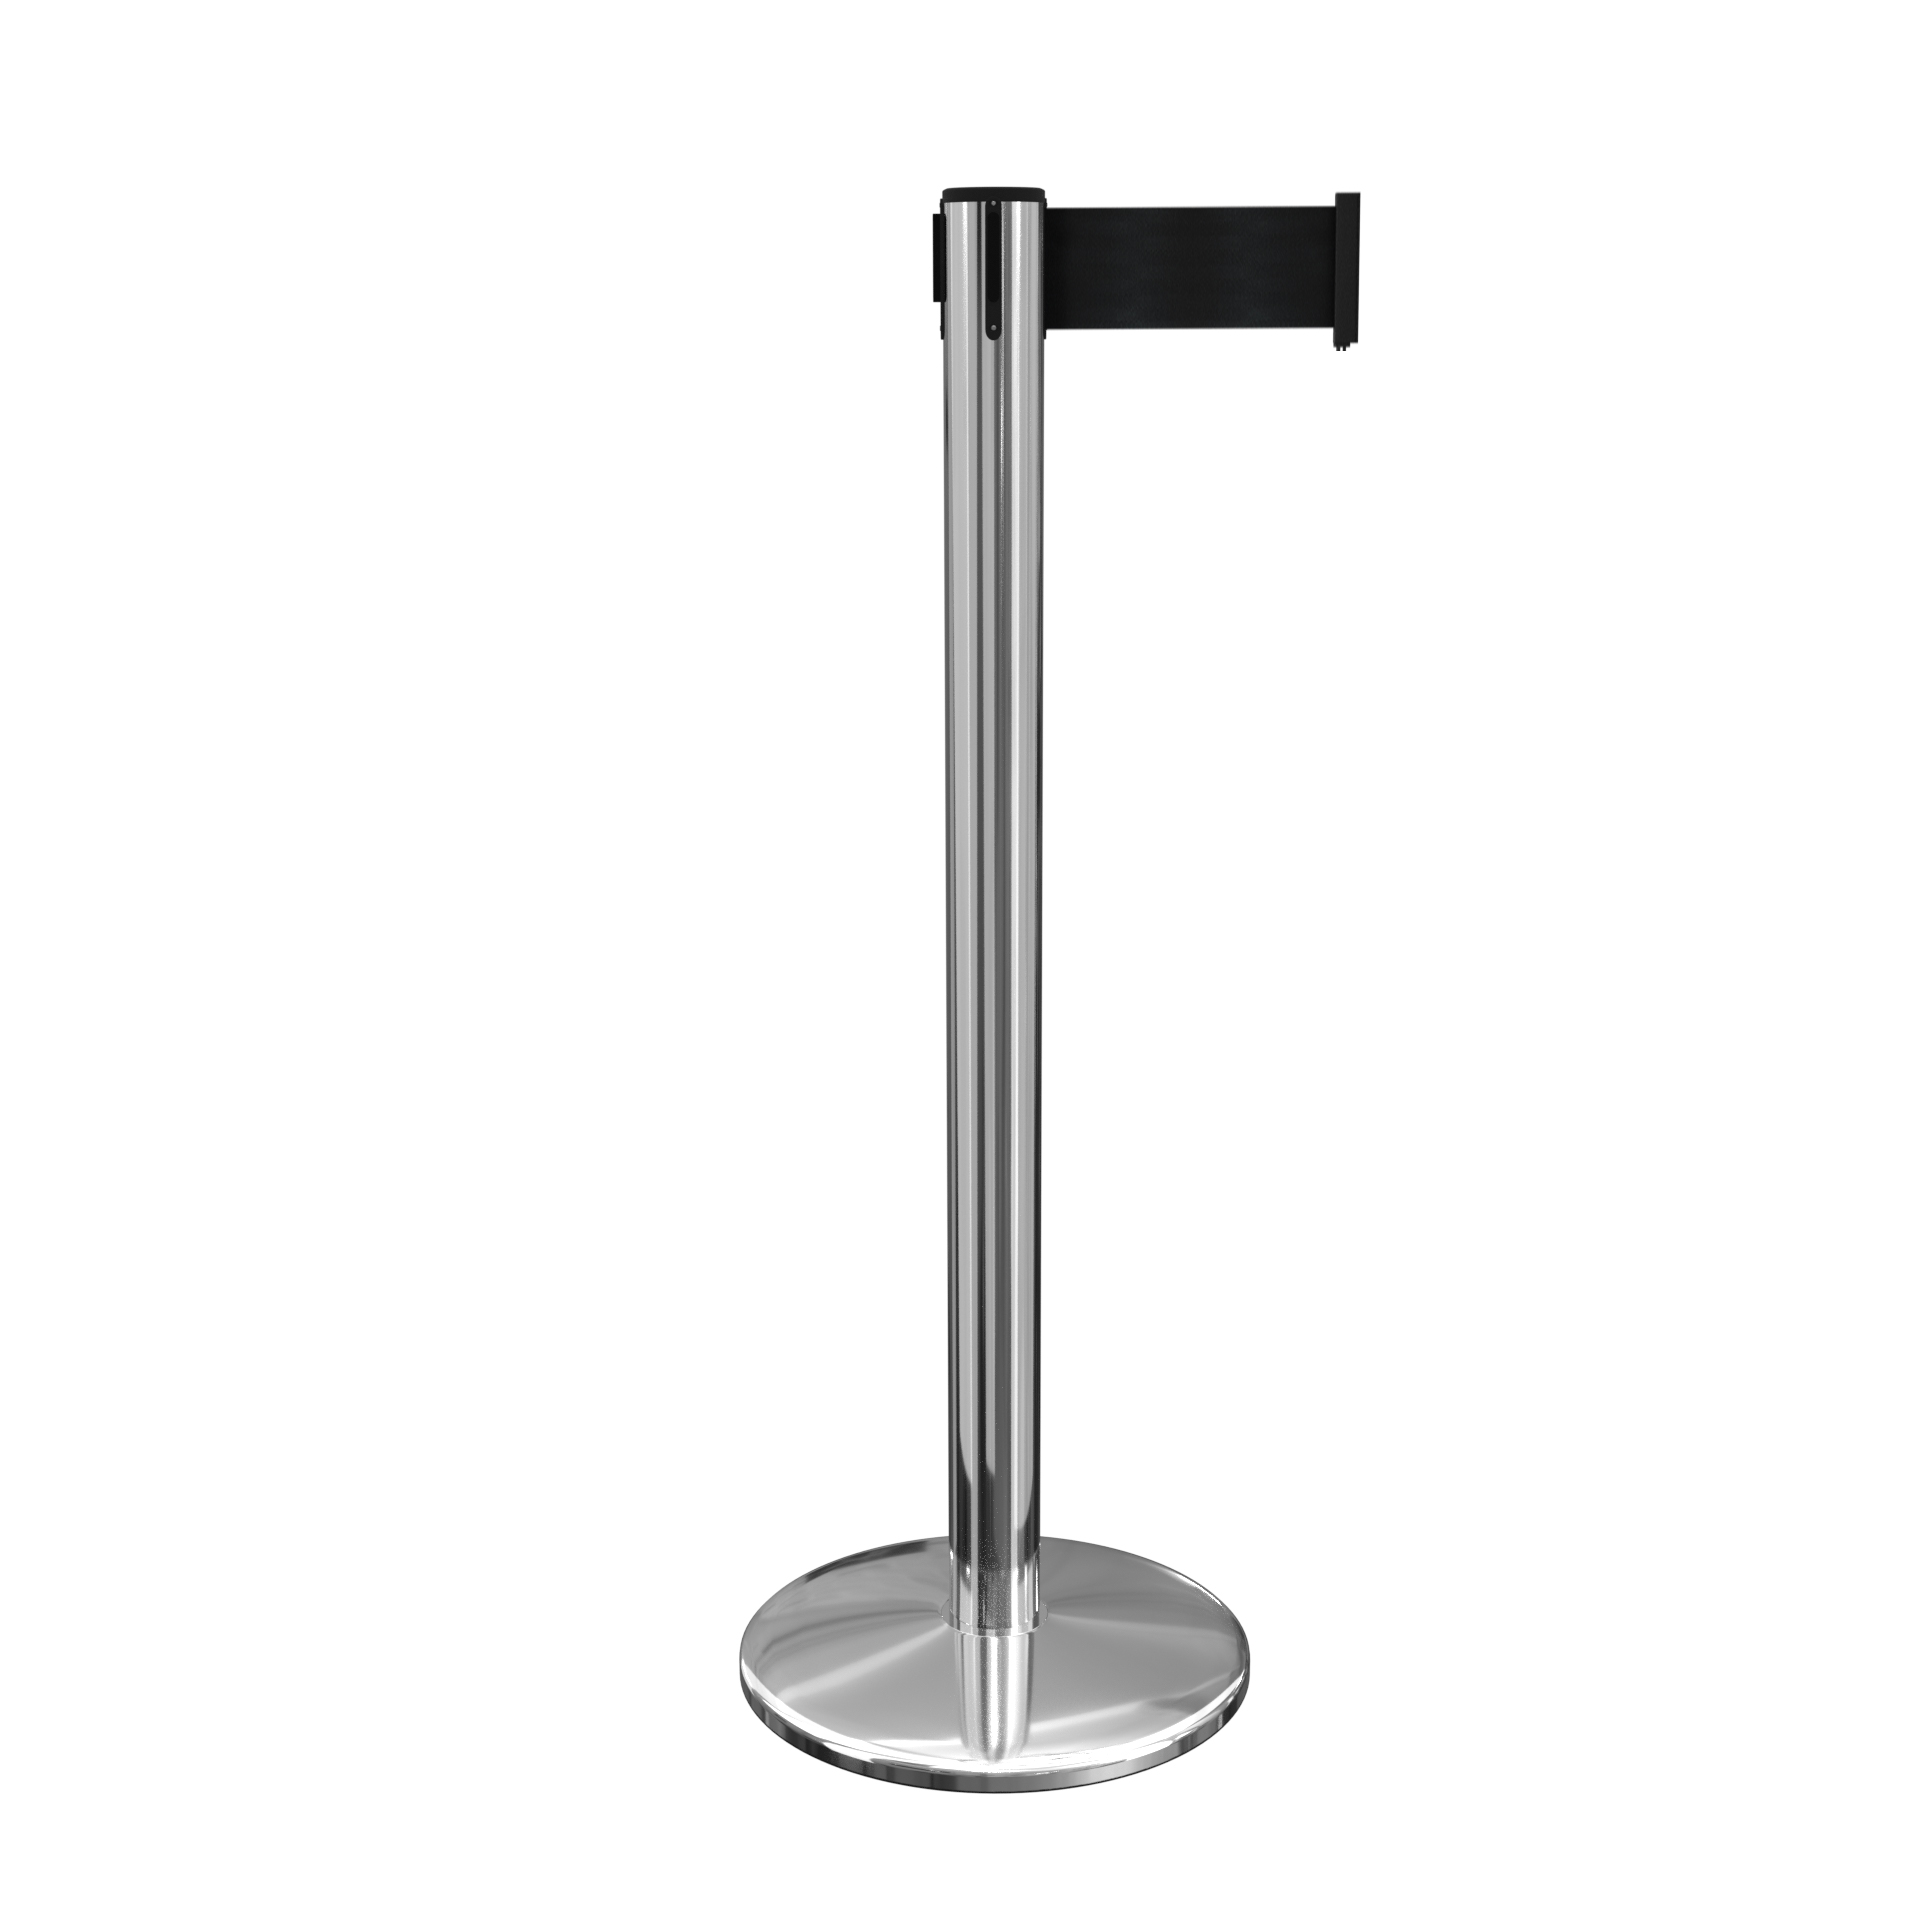 Polished Stainless QueuePro 250 Retractable Belt Barrier with a 3 Inch Belt